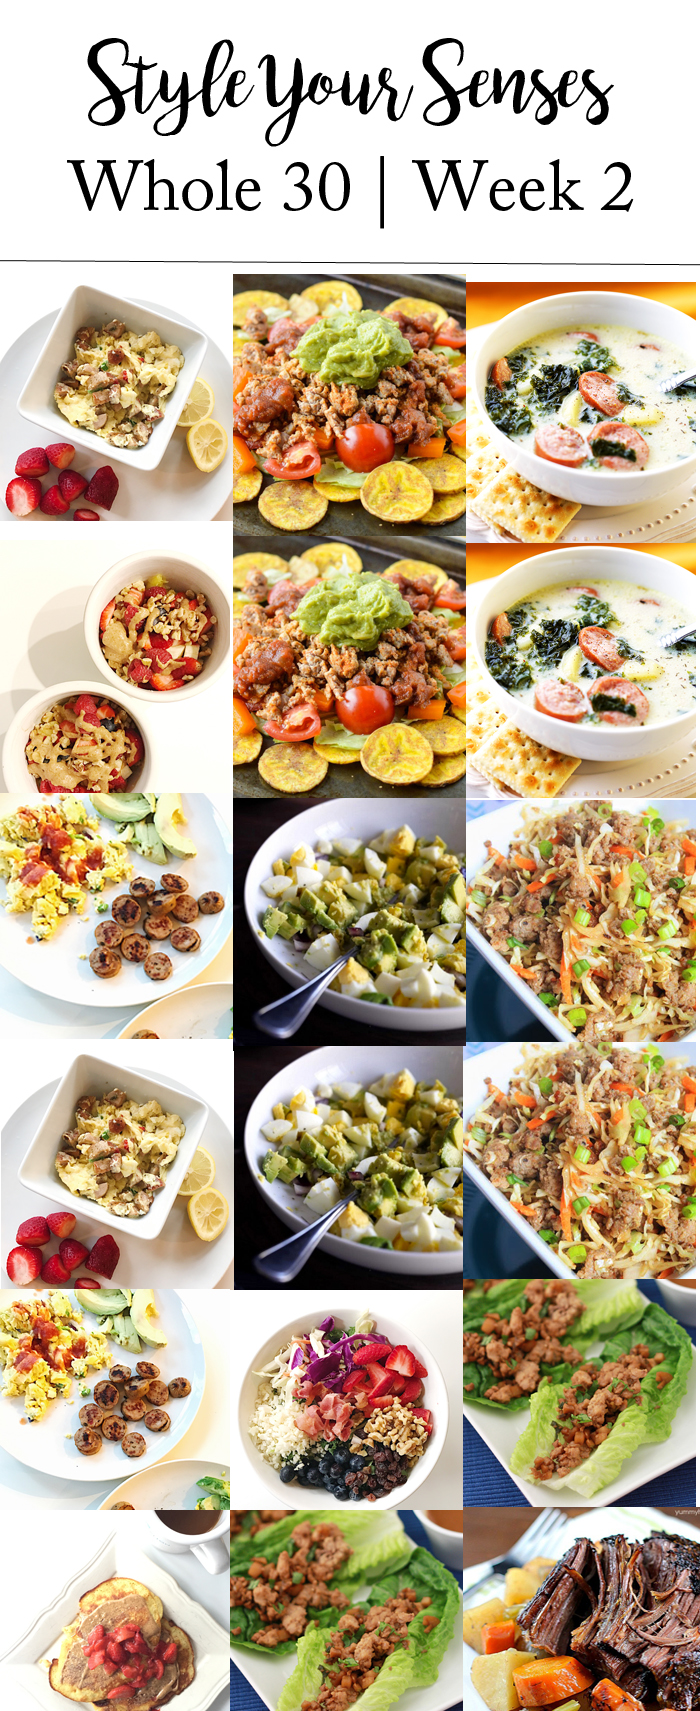 Whole30 Week 2 Update + Meal Plan featured by popular Texas lifestyle blogger, Style Your Senses